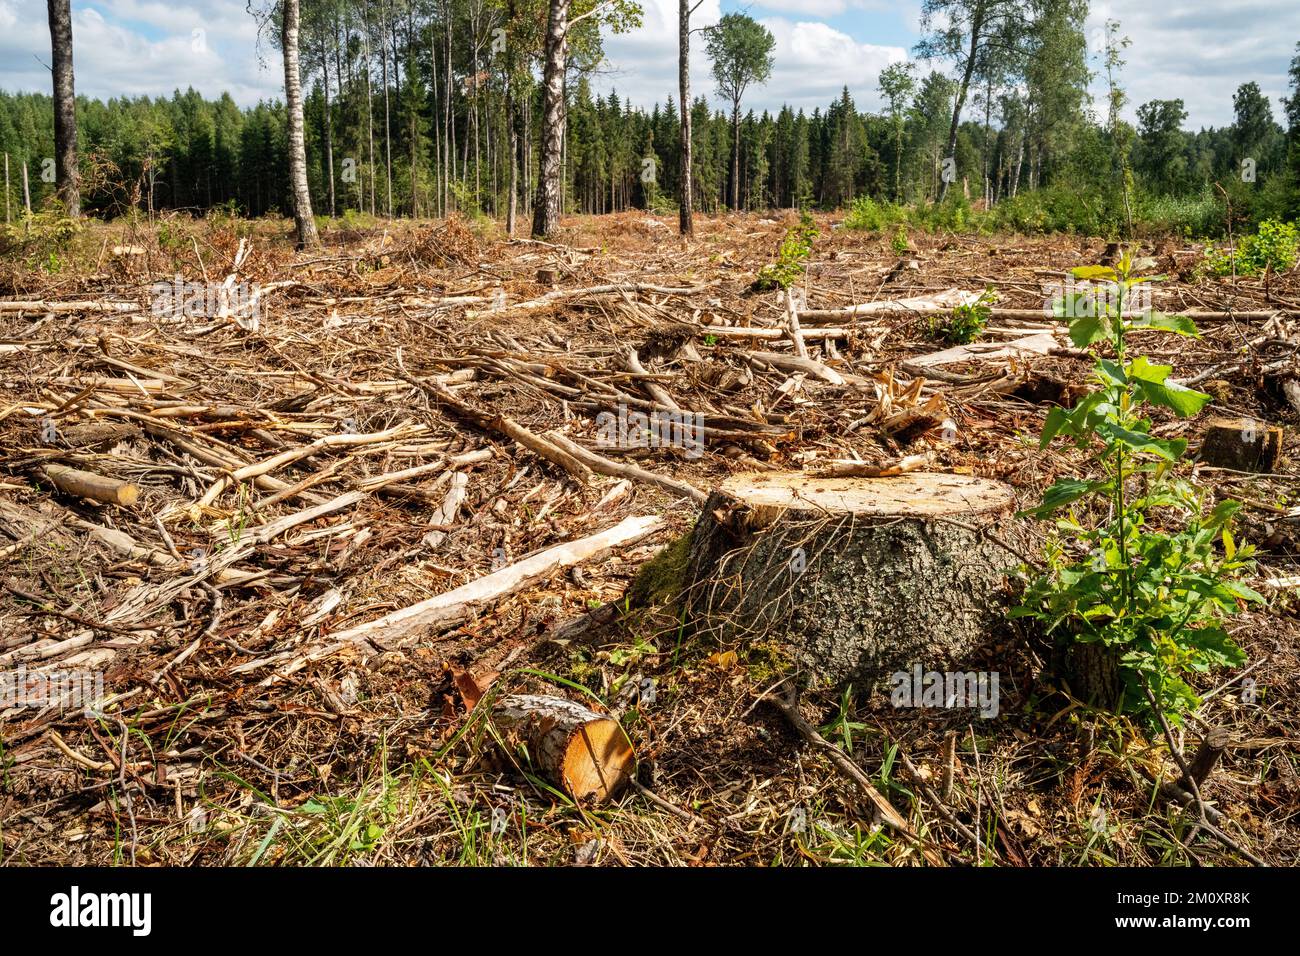 A fresh clear-cut area with a stump in the foreground in Northern Latvia, Europe Stock Photo